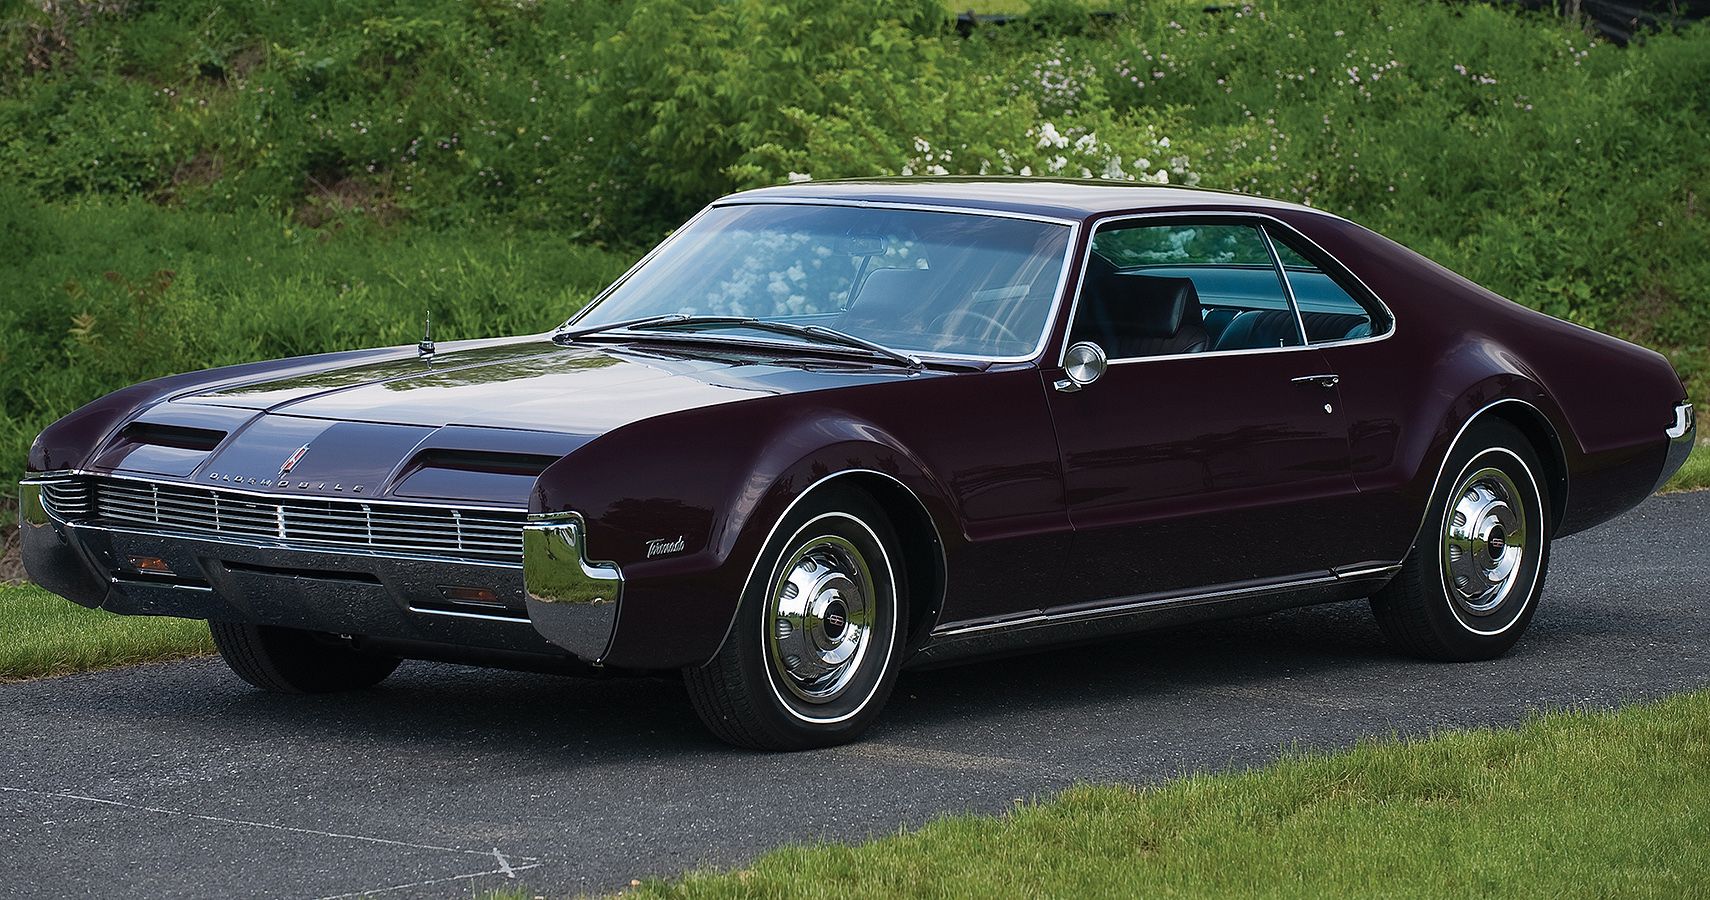 The Good Olds: 1966 Oldsmobile Toronado, GM’s First Front-Wheel-Drive